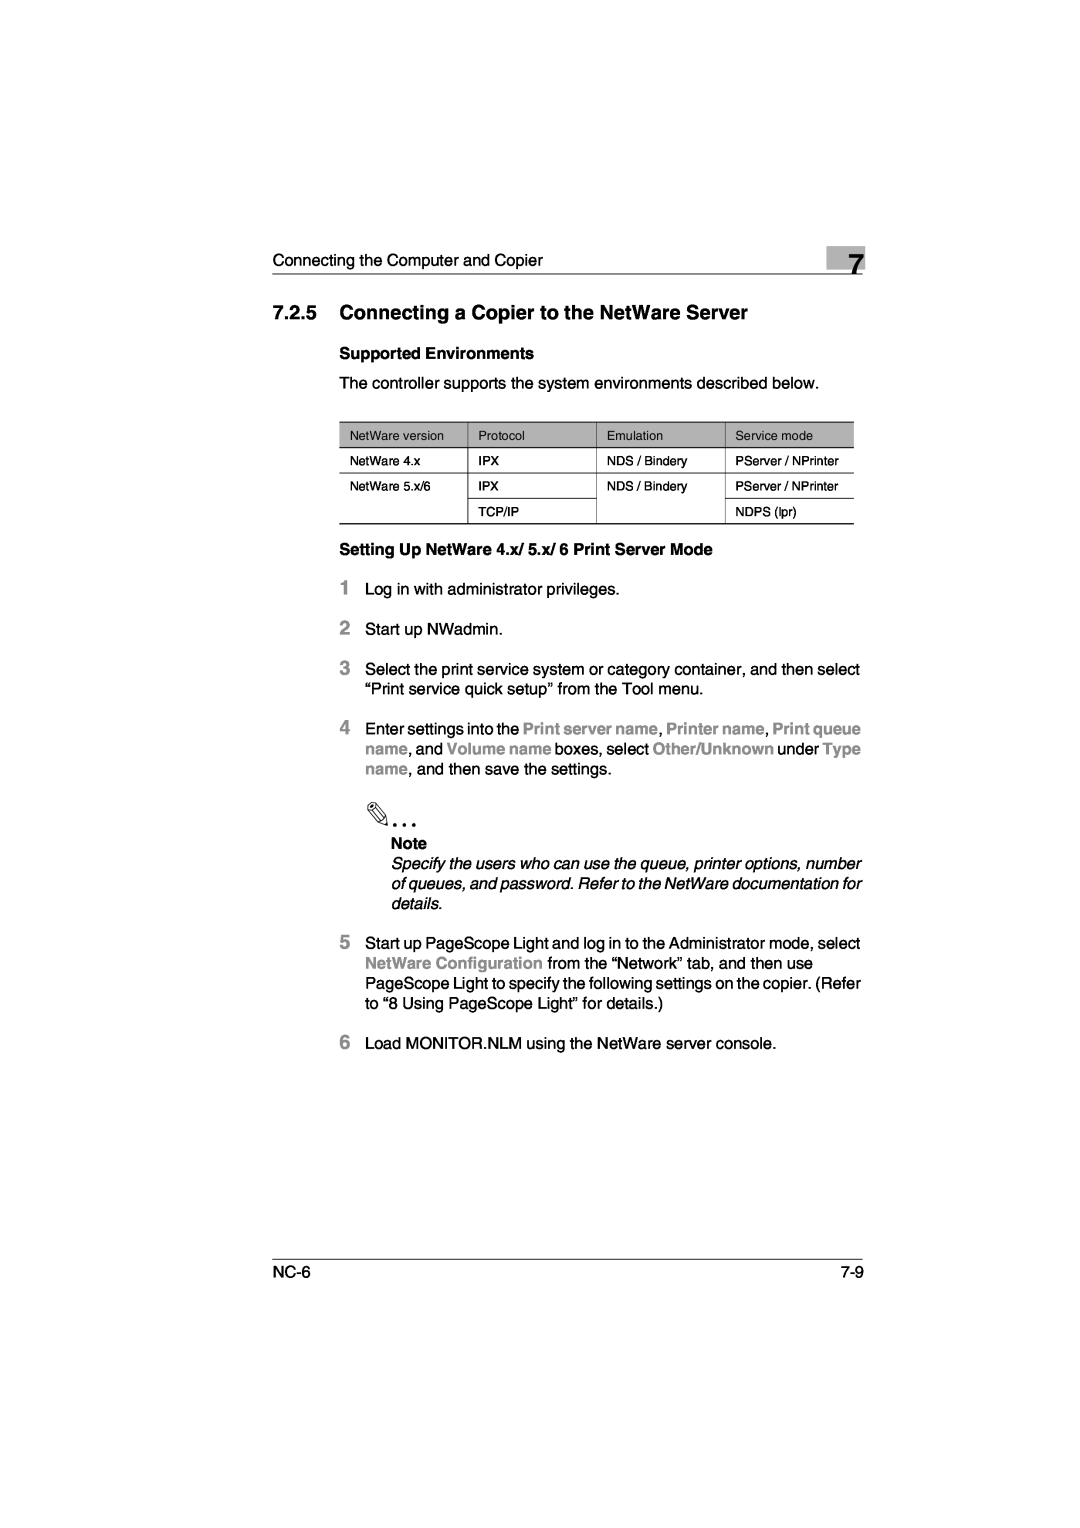 Konica Minolta NC-6 user manual Connecting a Copier to the NetWare Server 